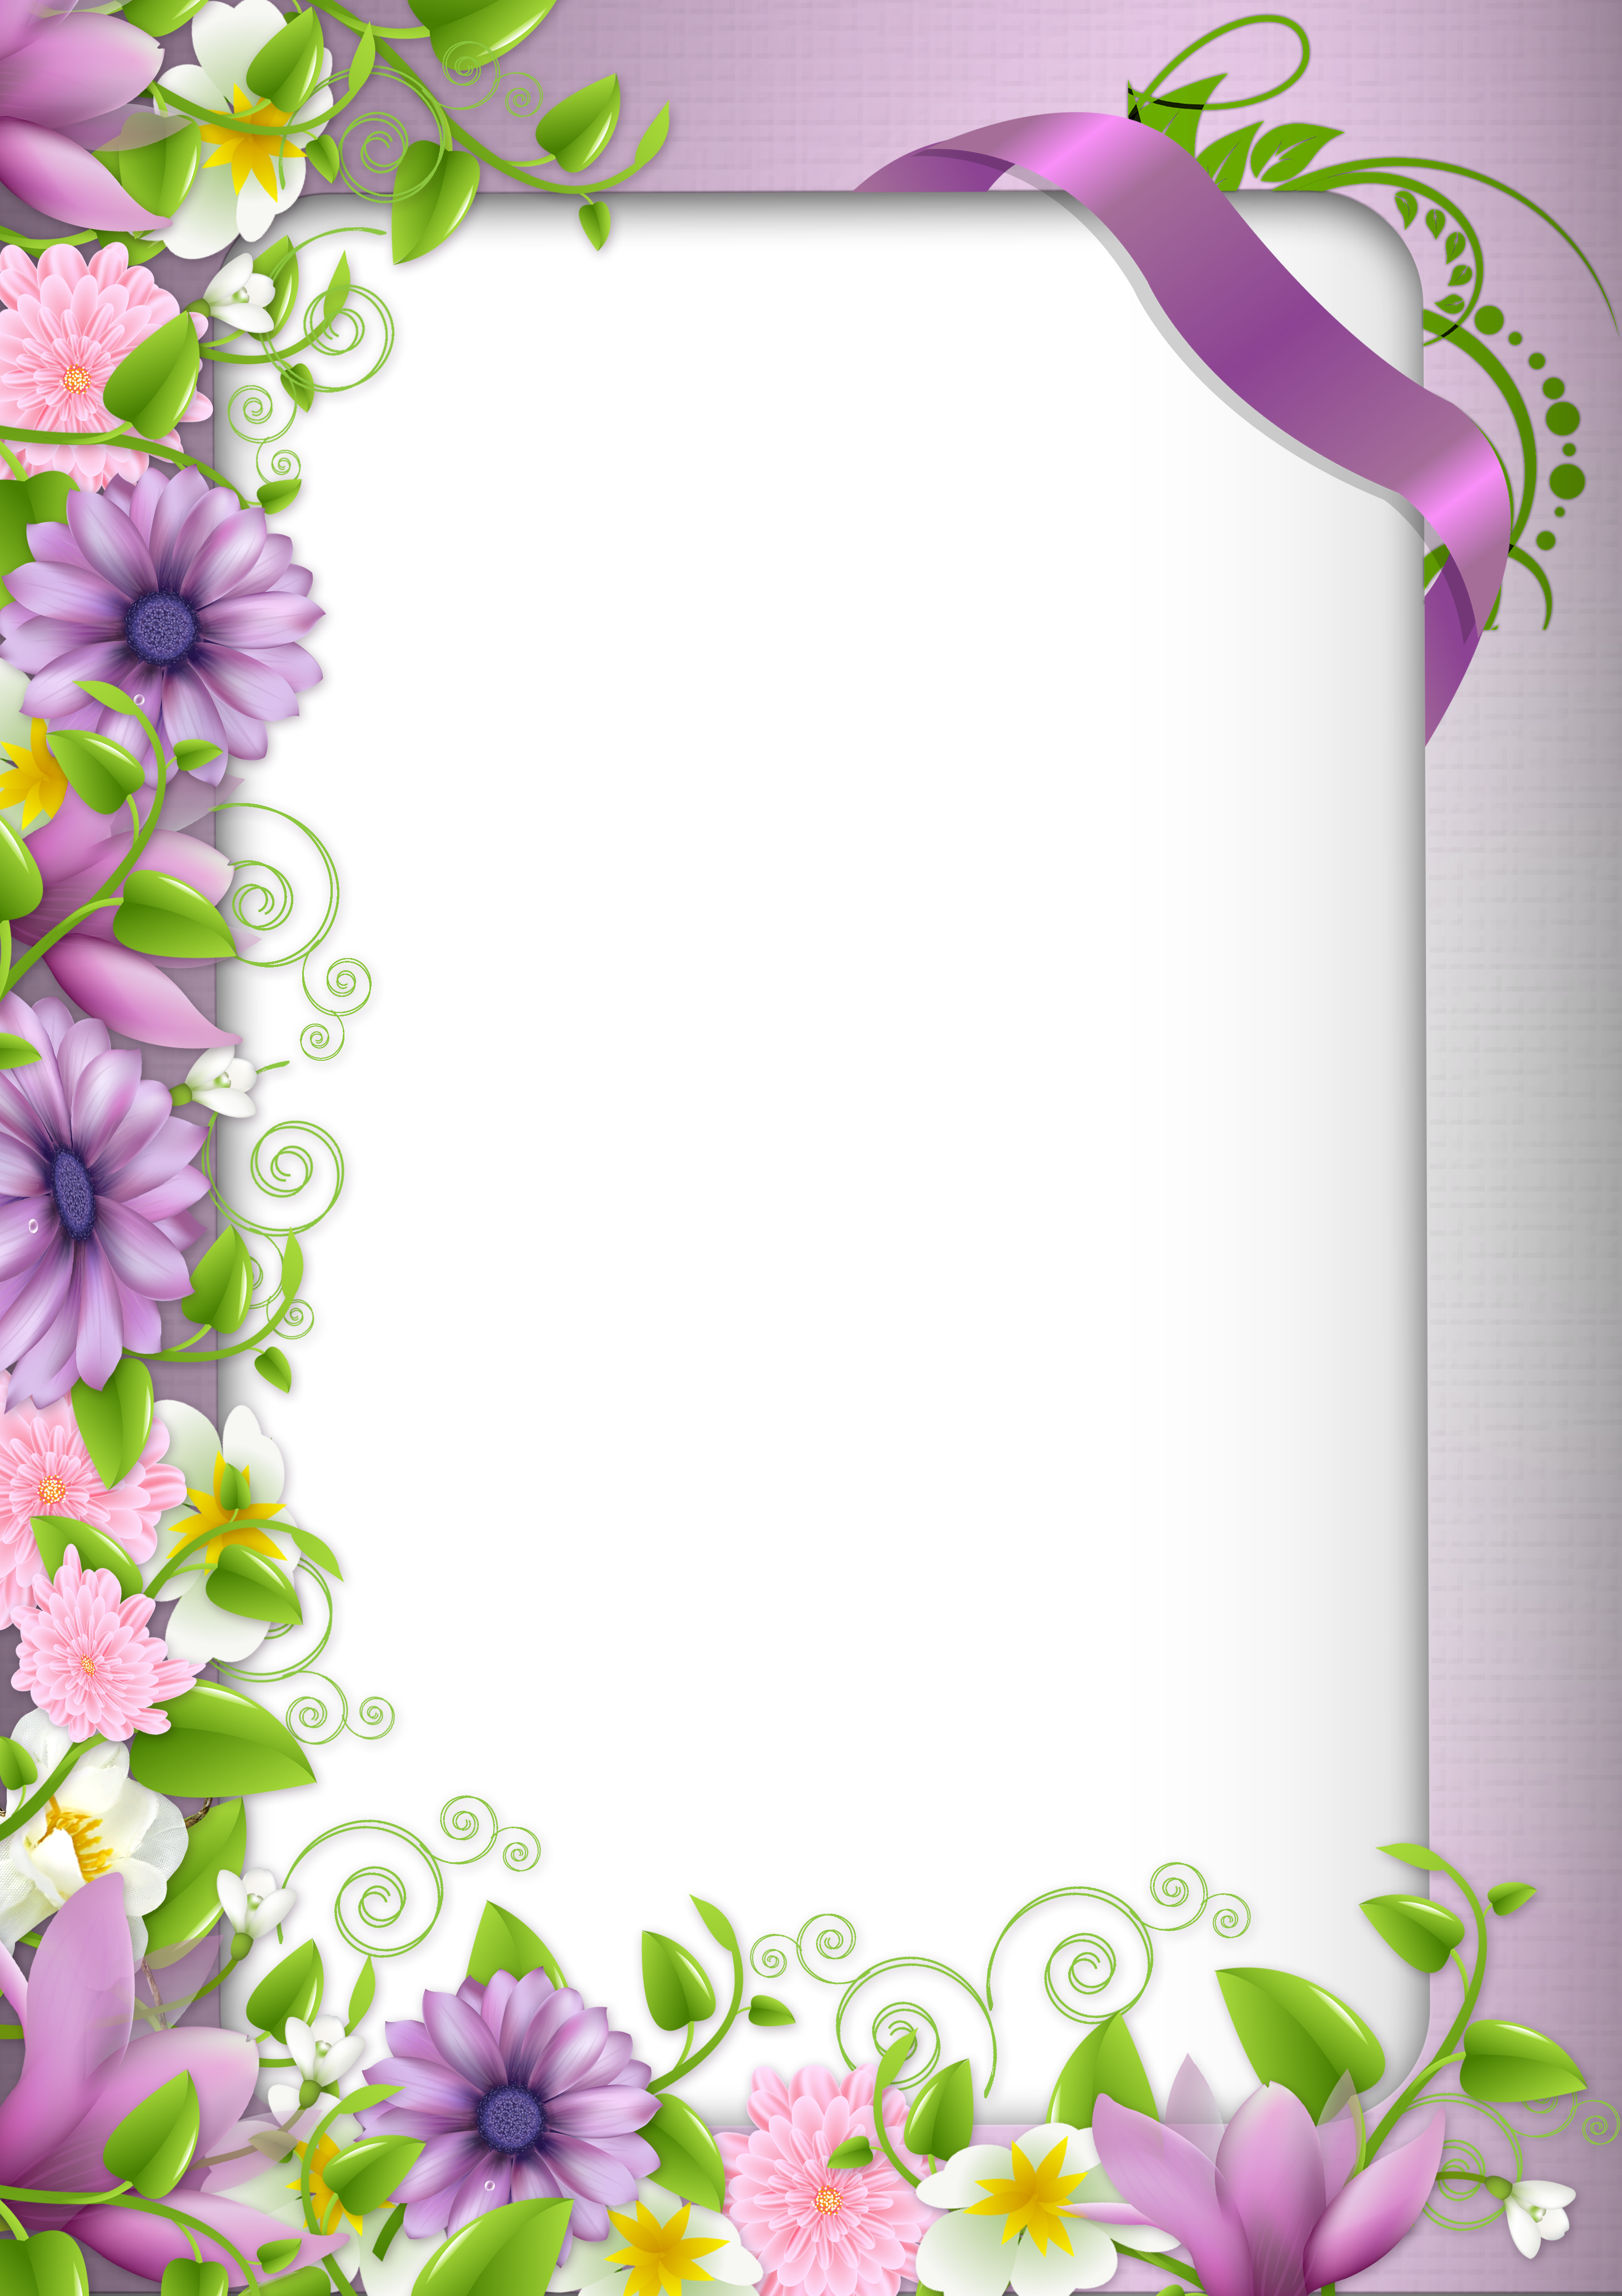 Sunny clipart borders. Transparent png photo frame